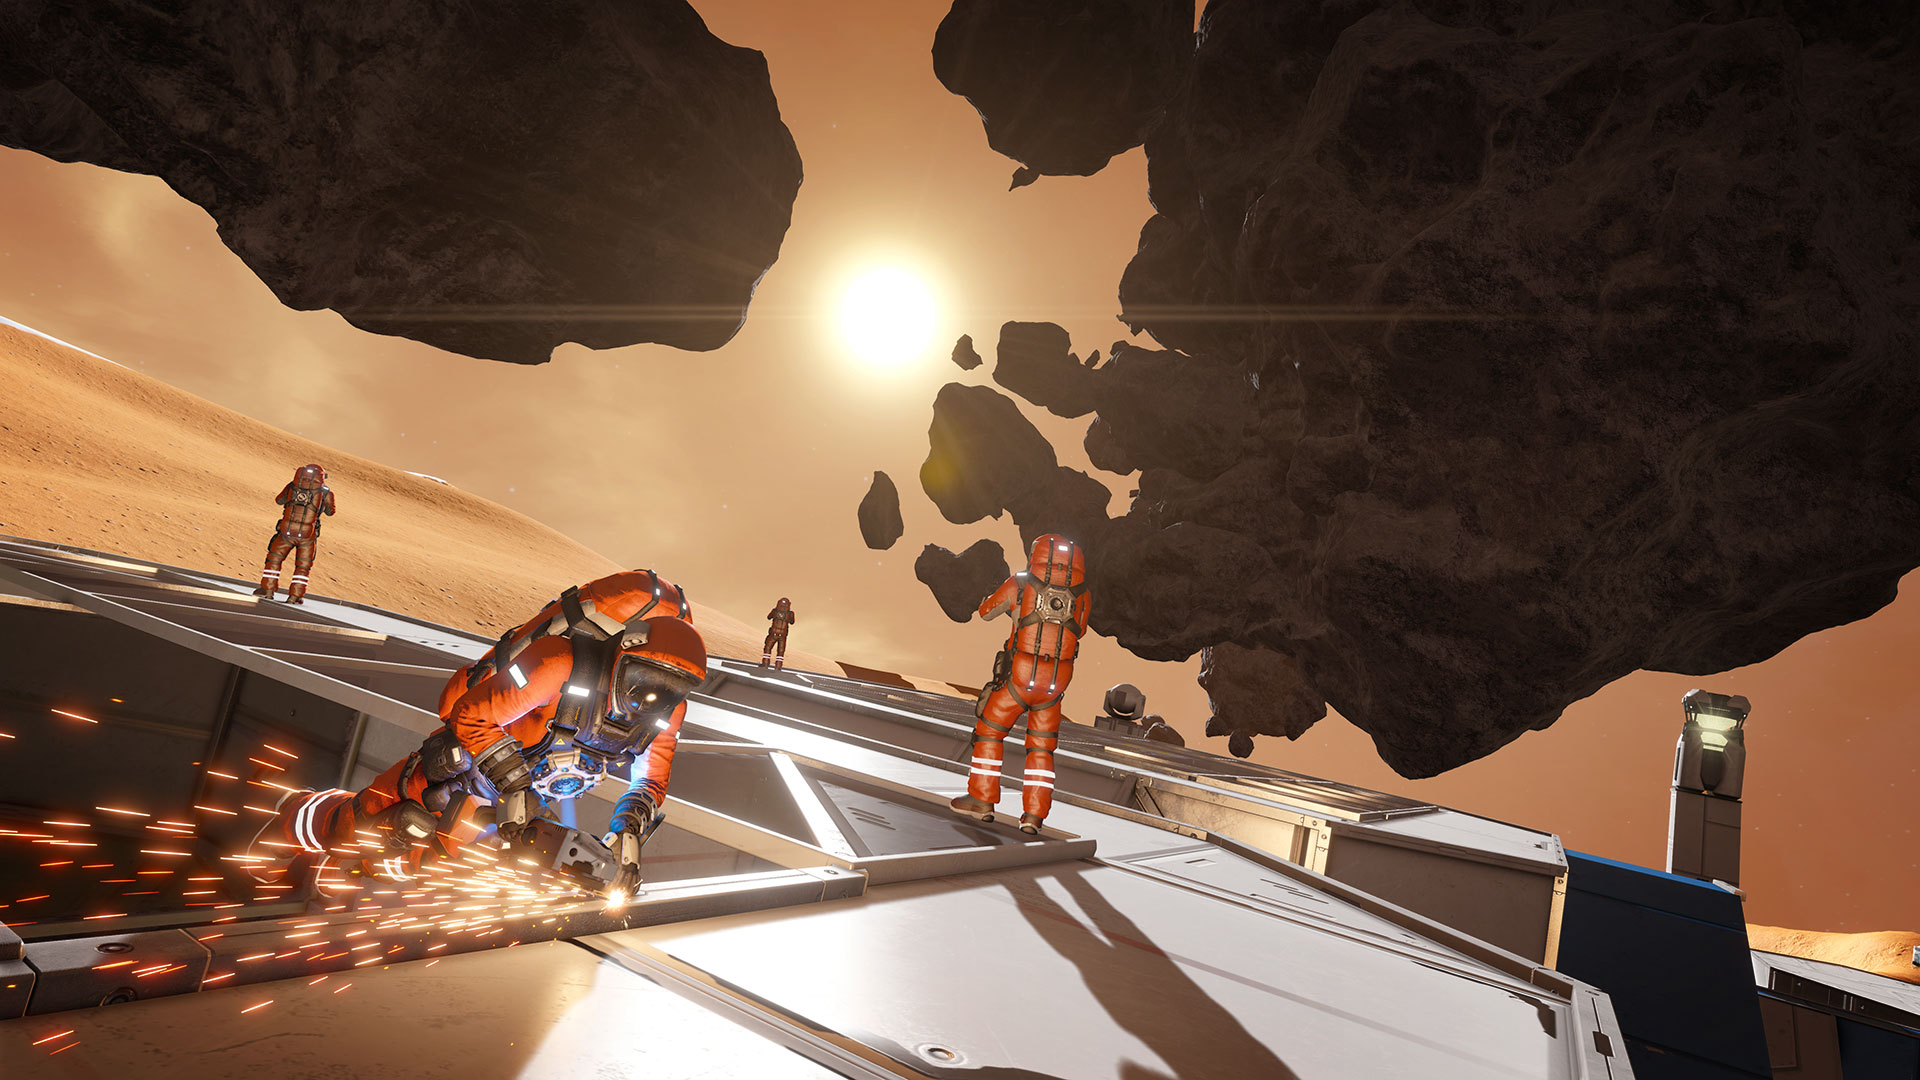 HD desktop wallpaper featuring space engineers working on a metal structure against a backdrop of floating rocks and a bright sun on a Mars-like planet.